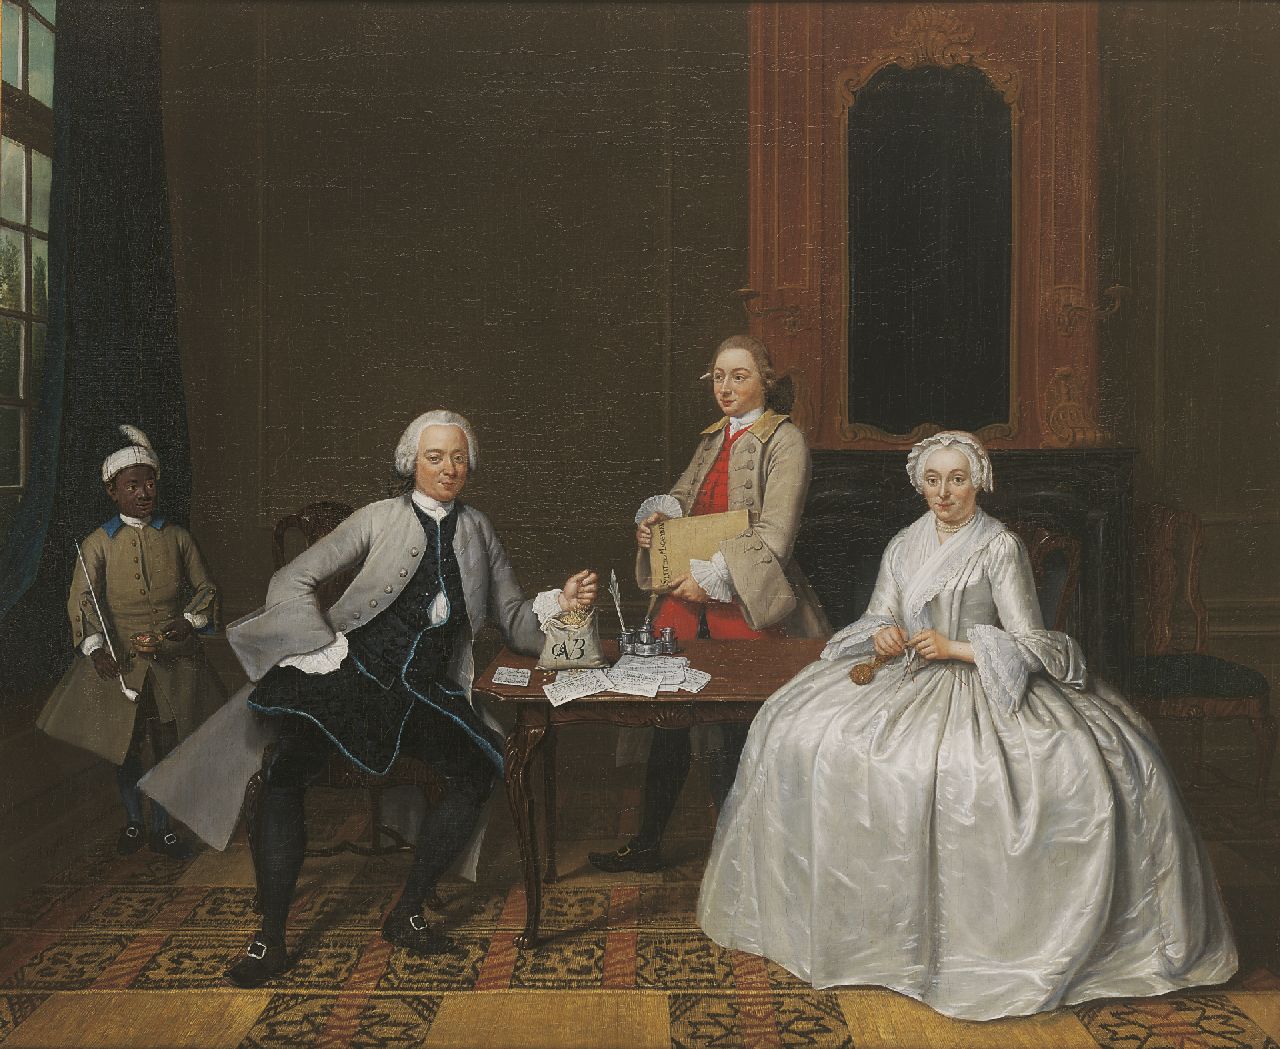 Regters T.  | Tibout Regters, Merchant and banker Gijsbrecht Antwerpen Verbrugge van Freyhoff, his wife Maria Hooft, the bookkeeper and a black servant, oil on canvas 68.0 x 82.7 cm, signed l.l. and dated 1750